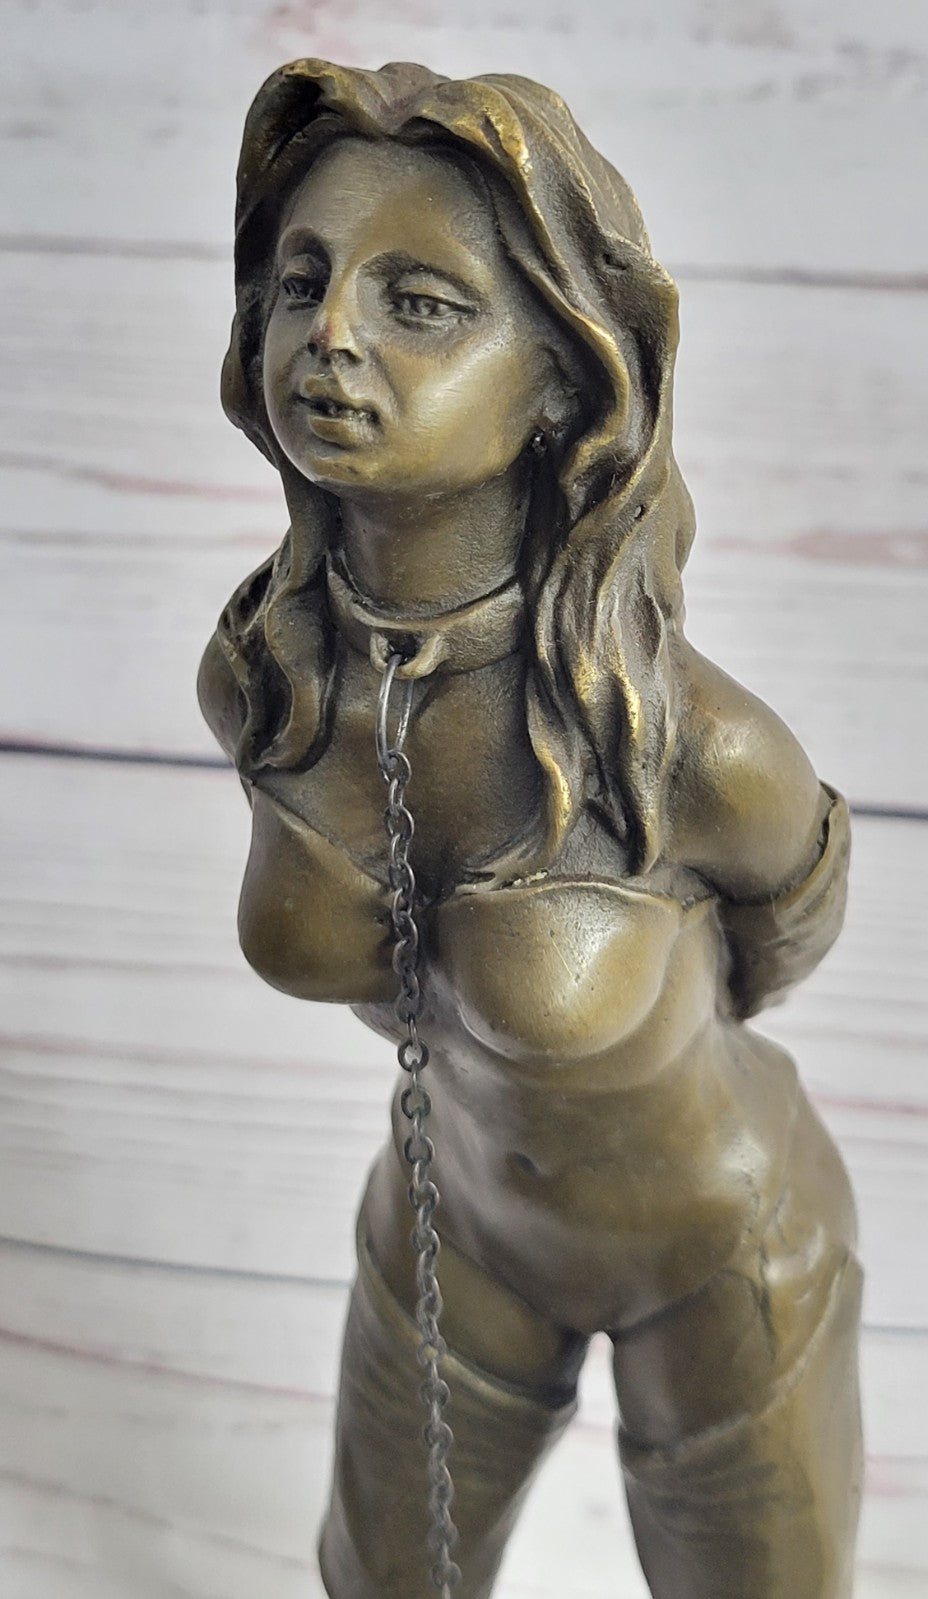 Handcrafted bronze sculpture SALE Marble Girl Nude Woman Erotic Preiss Signed